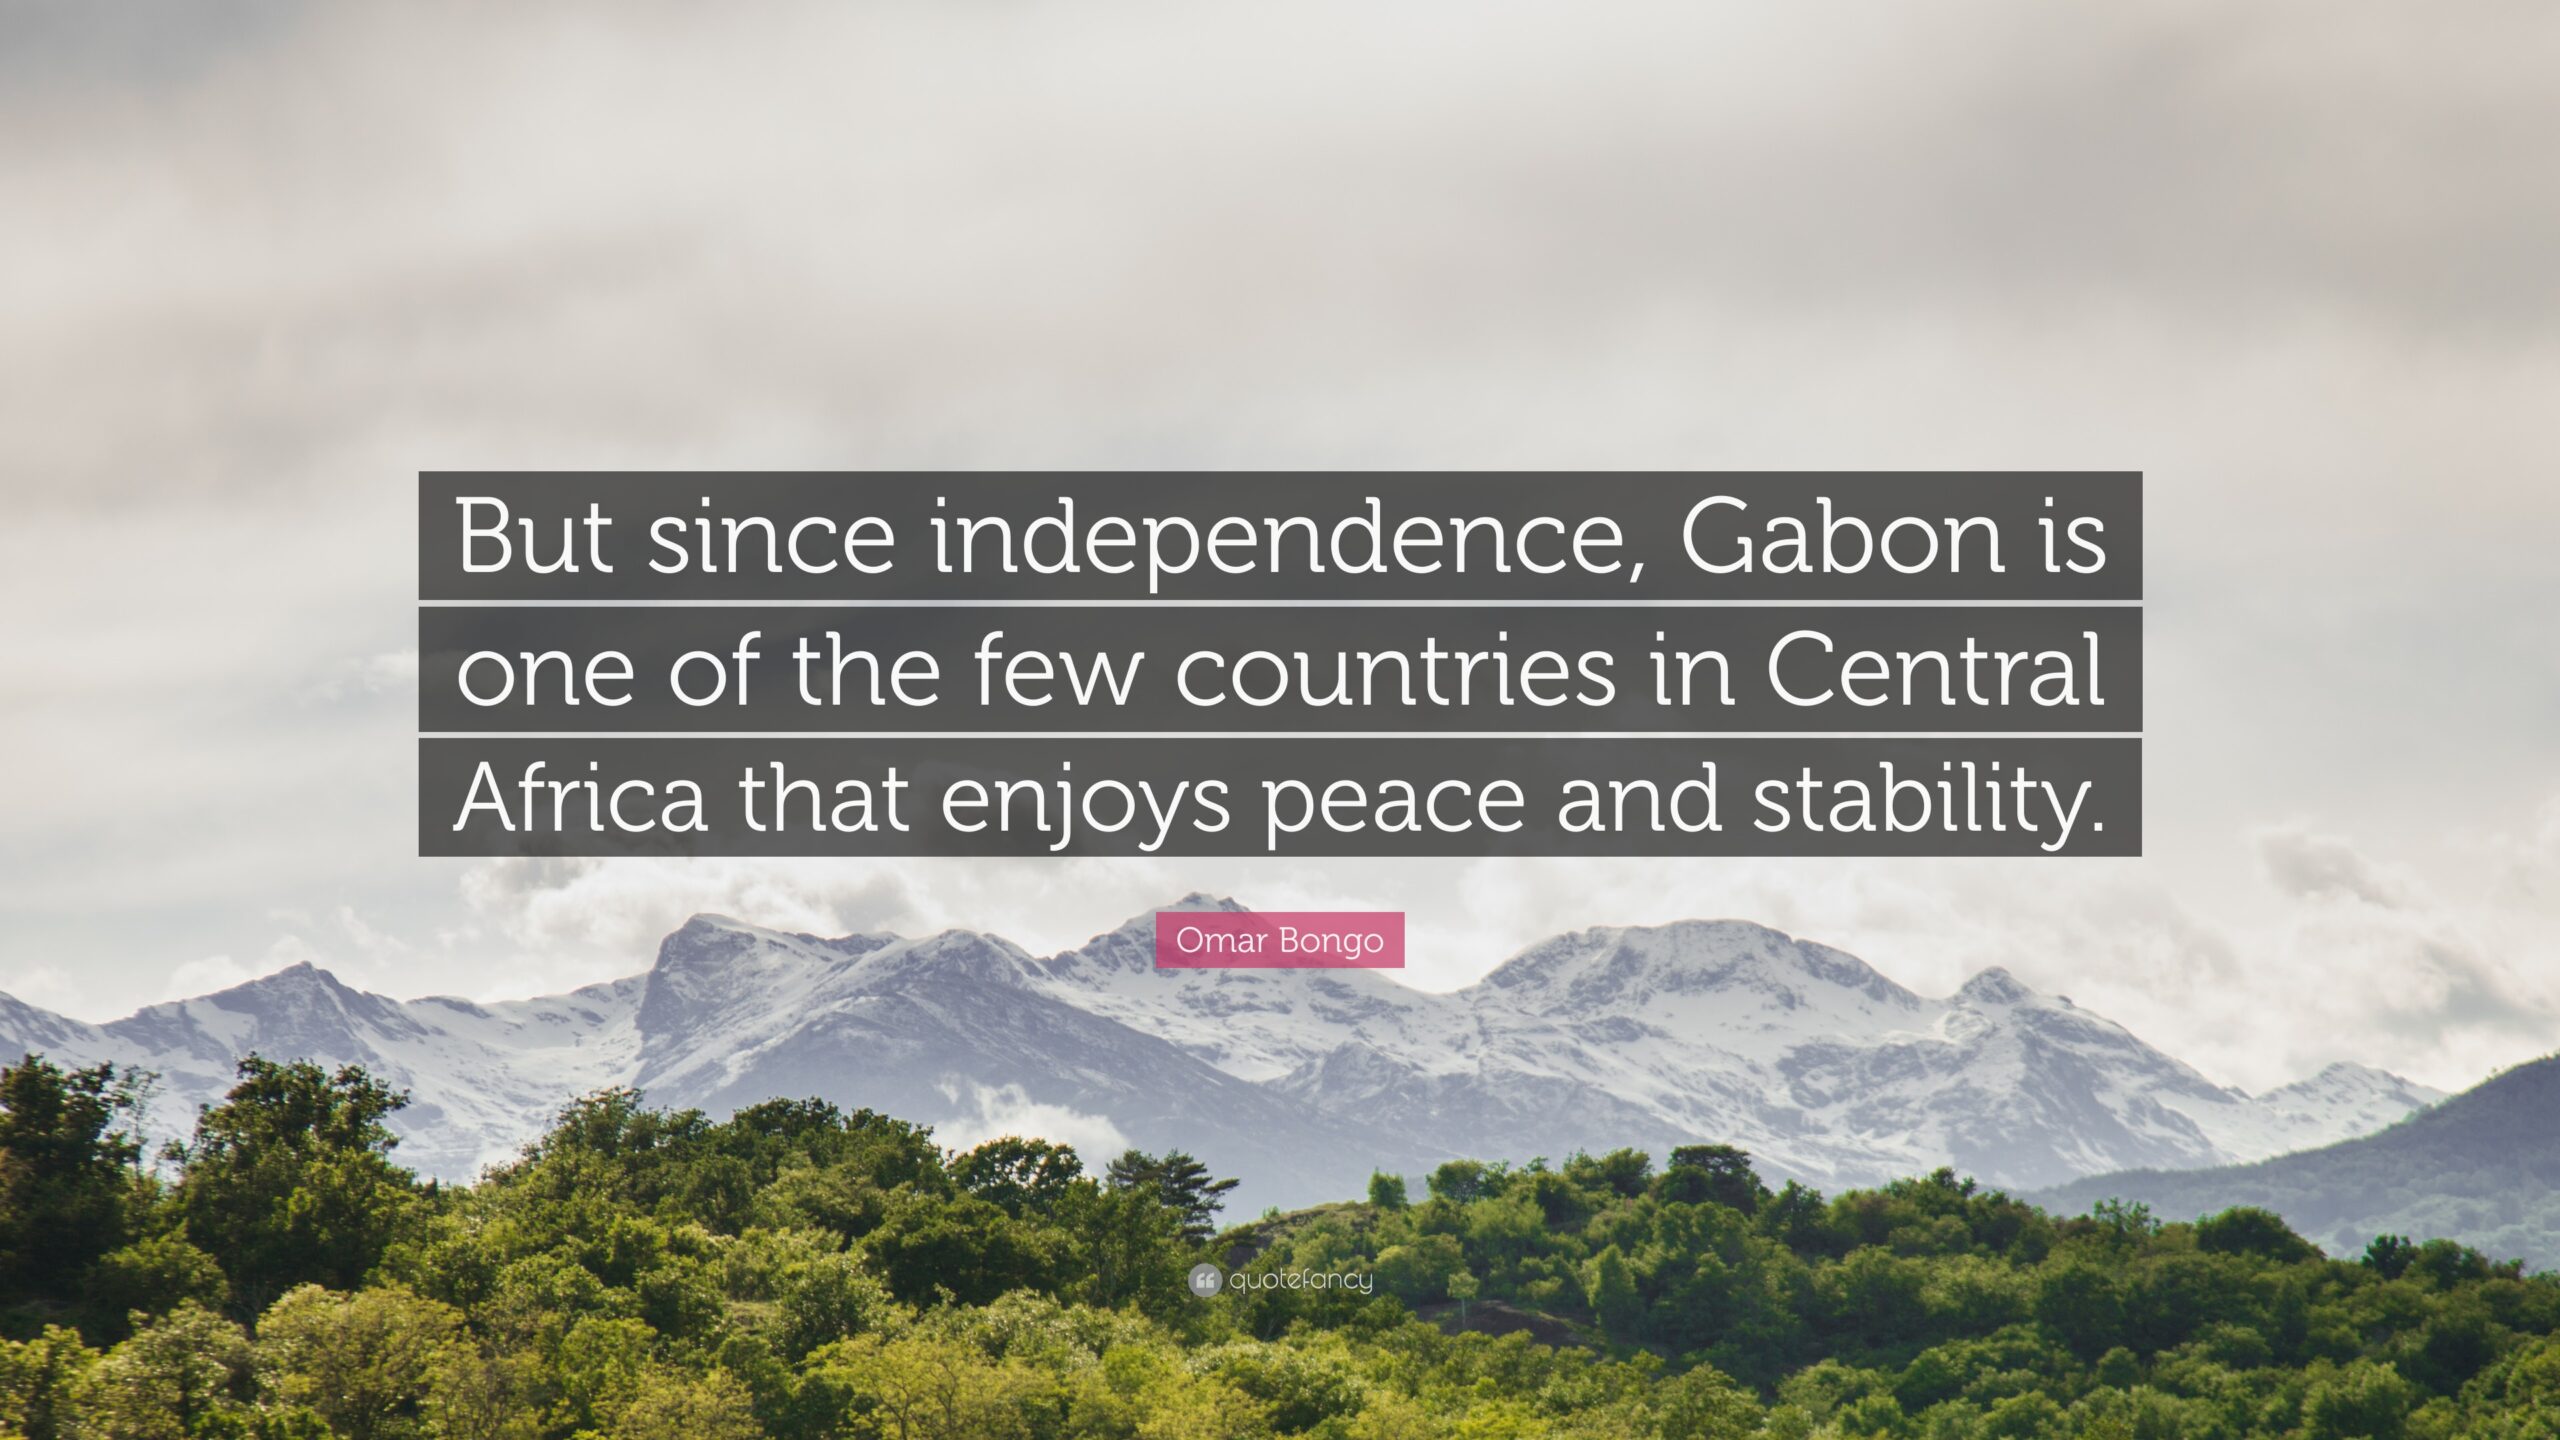 Omar Bongo Quote “But since independence, Gabon is one of the few